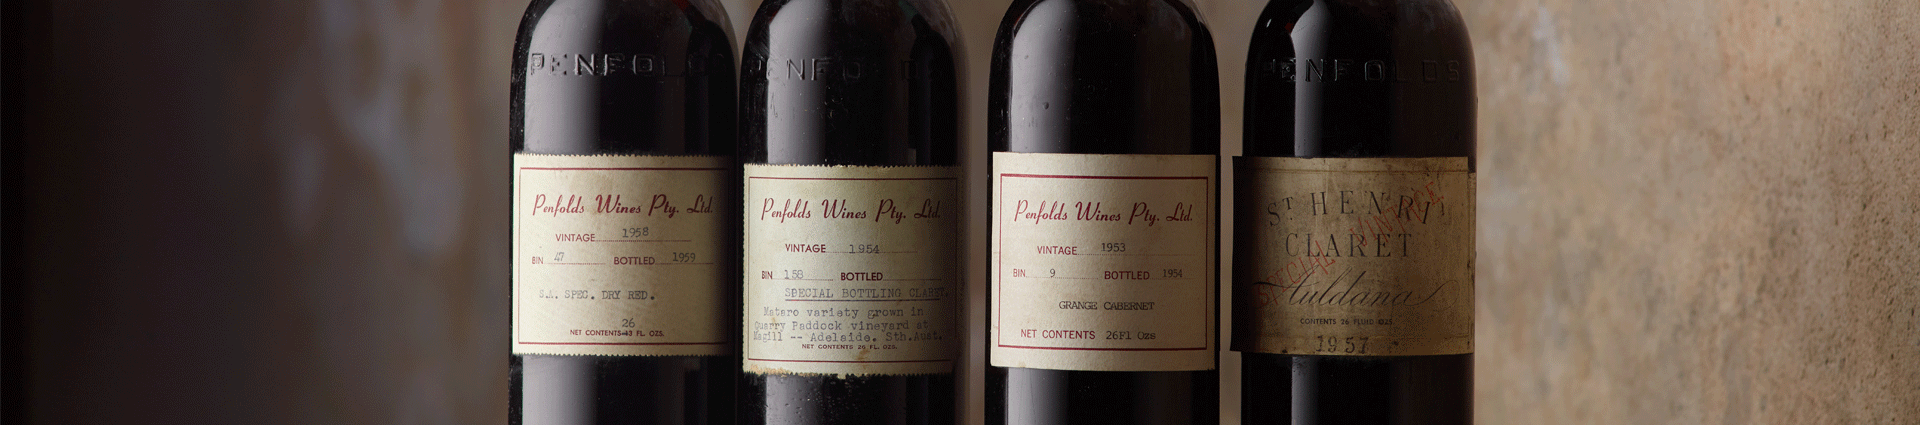 Four heritage Penfolds bottle labels from the 1950s